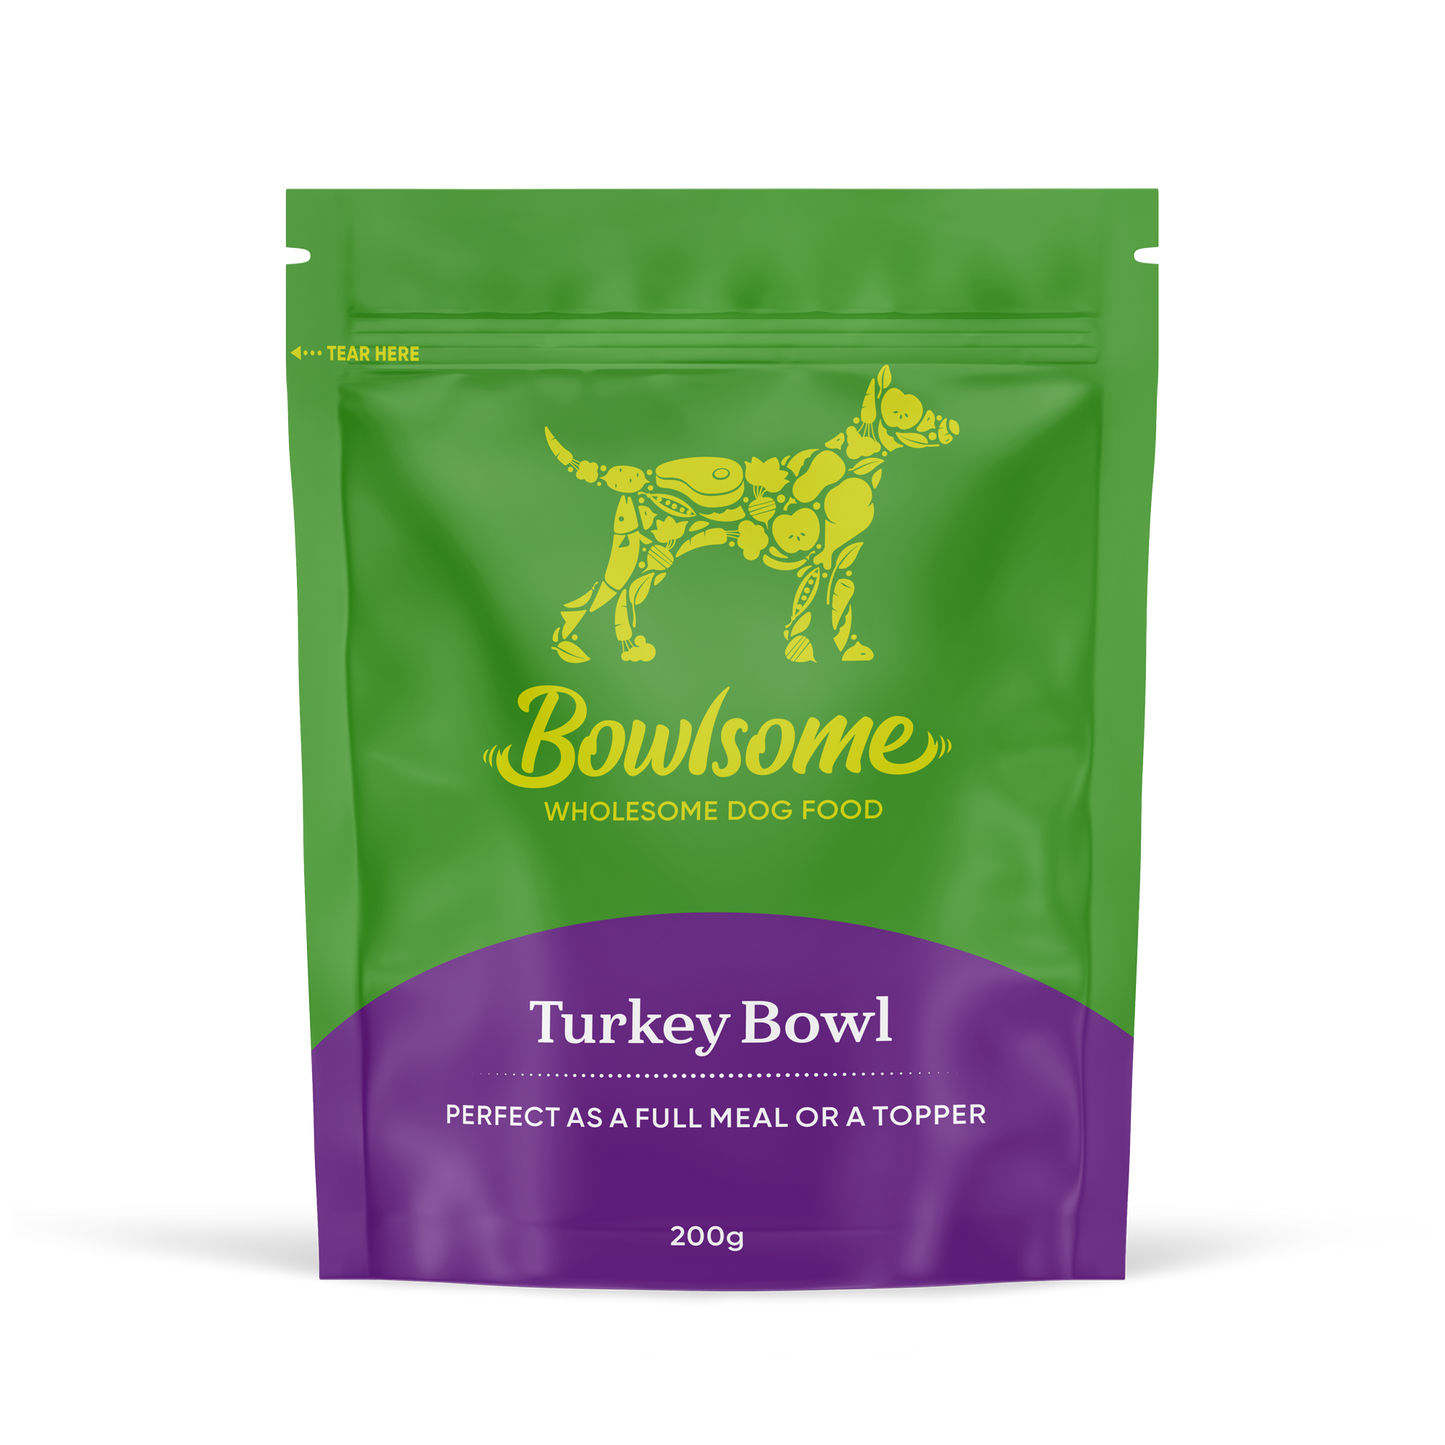 Pouch of dog food that reads "Bowlsome - Wholesome Dog Food, Turkey Bowl"